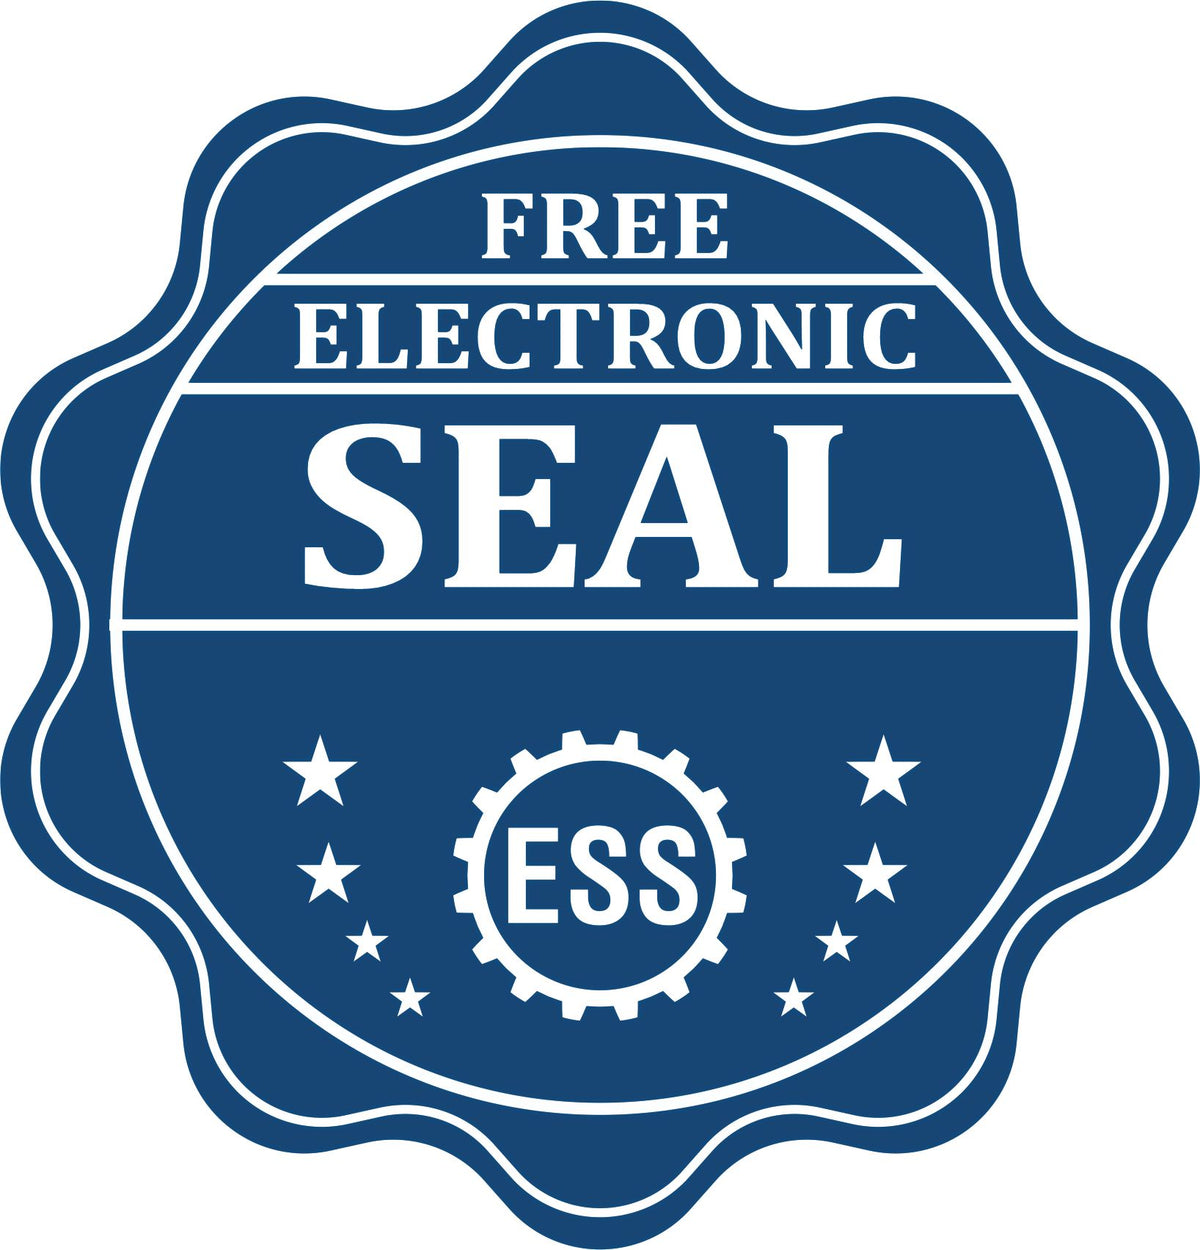 A badge showing a free electronic seal for the Long Reach Guam PE Seal with stars and the ESS gear on the emblem.